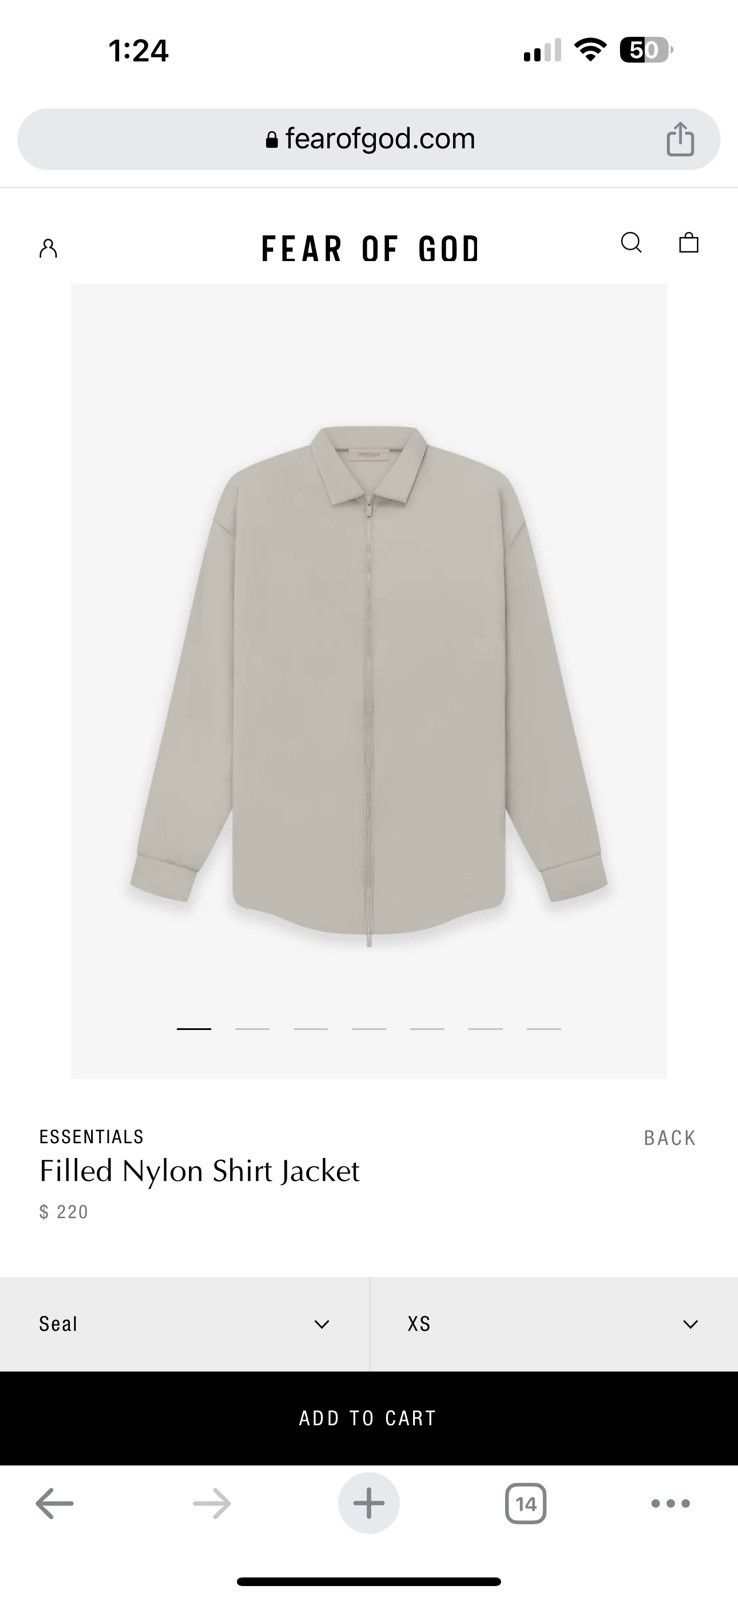 Fear of God Essentials Filled Nylon Shirt Jacket - Seal / XS | Grailed